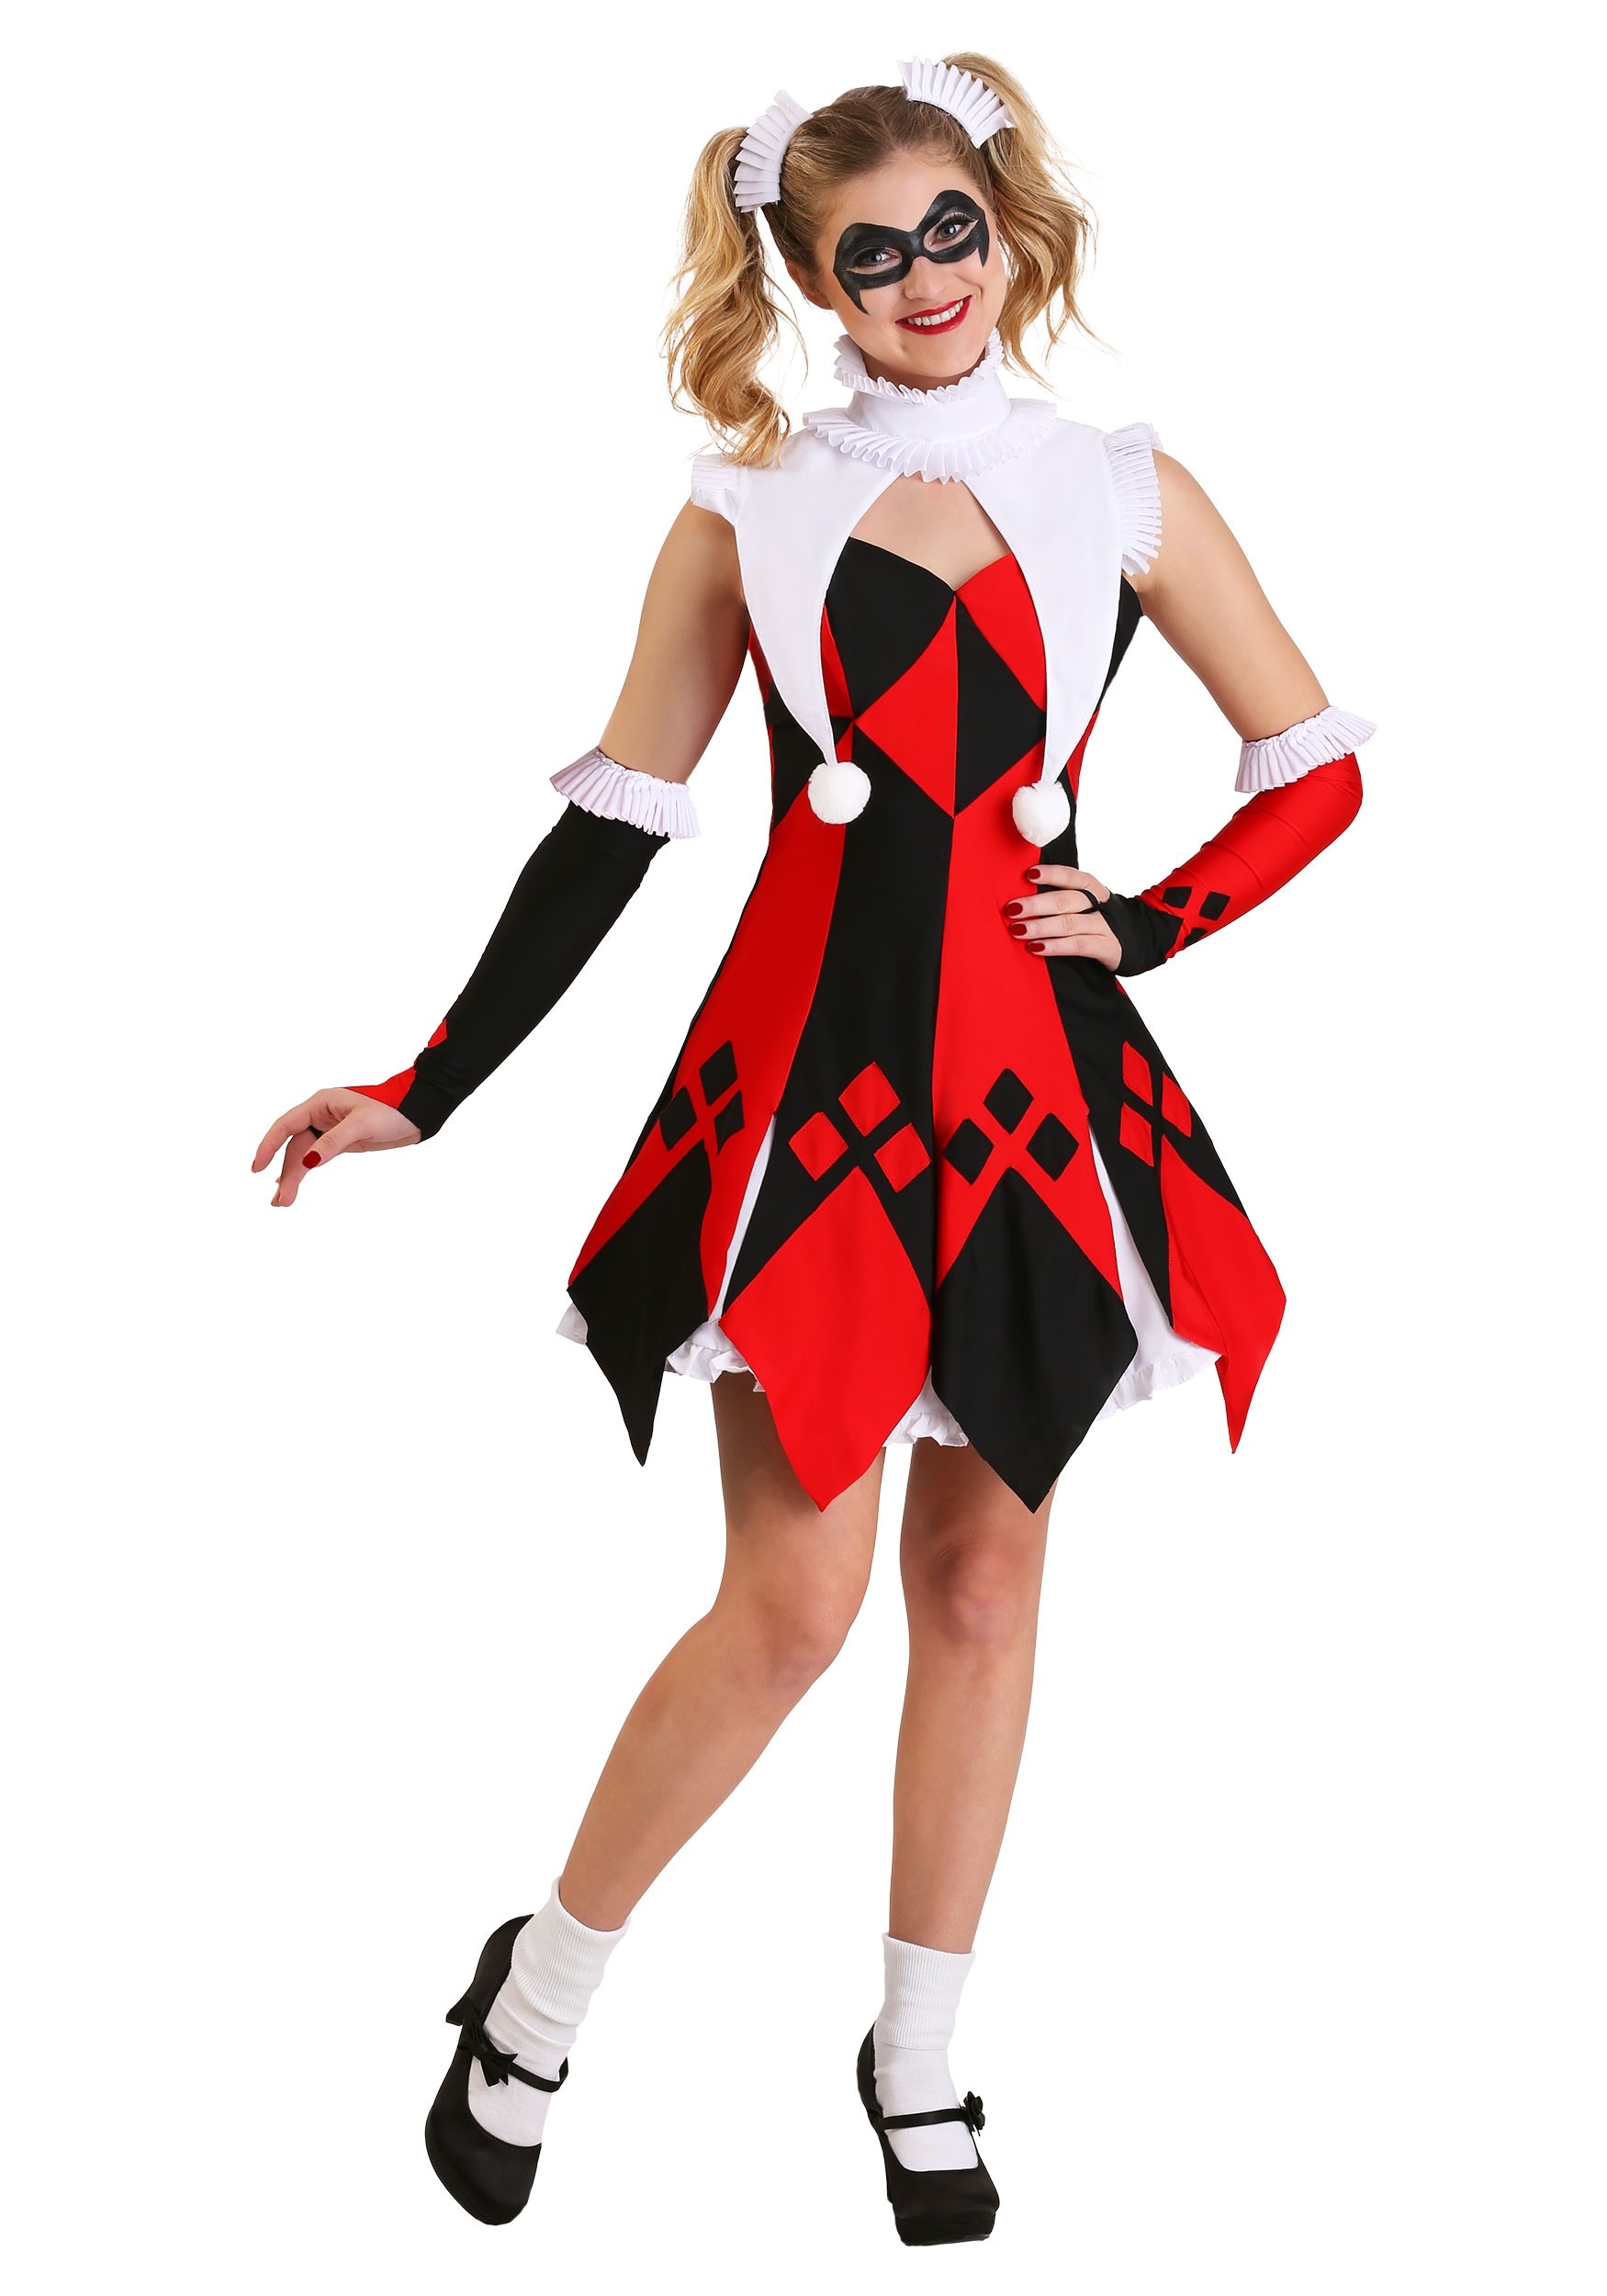 Photos - Fancy Dress FUN Costumes Cute Court Jester Plus Size Costume for Women Black/Red&#